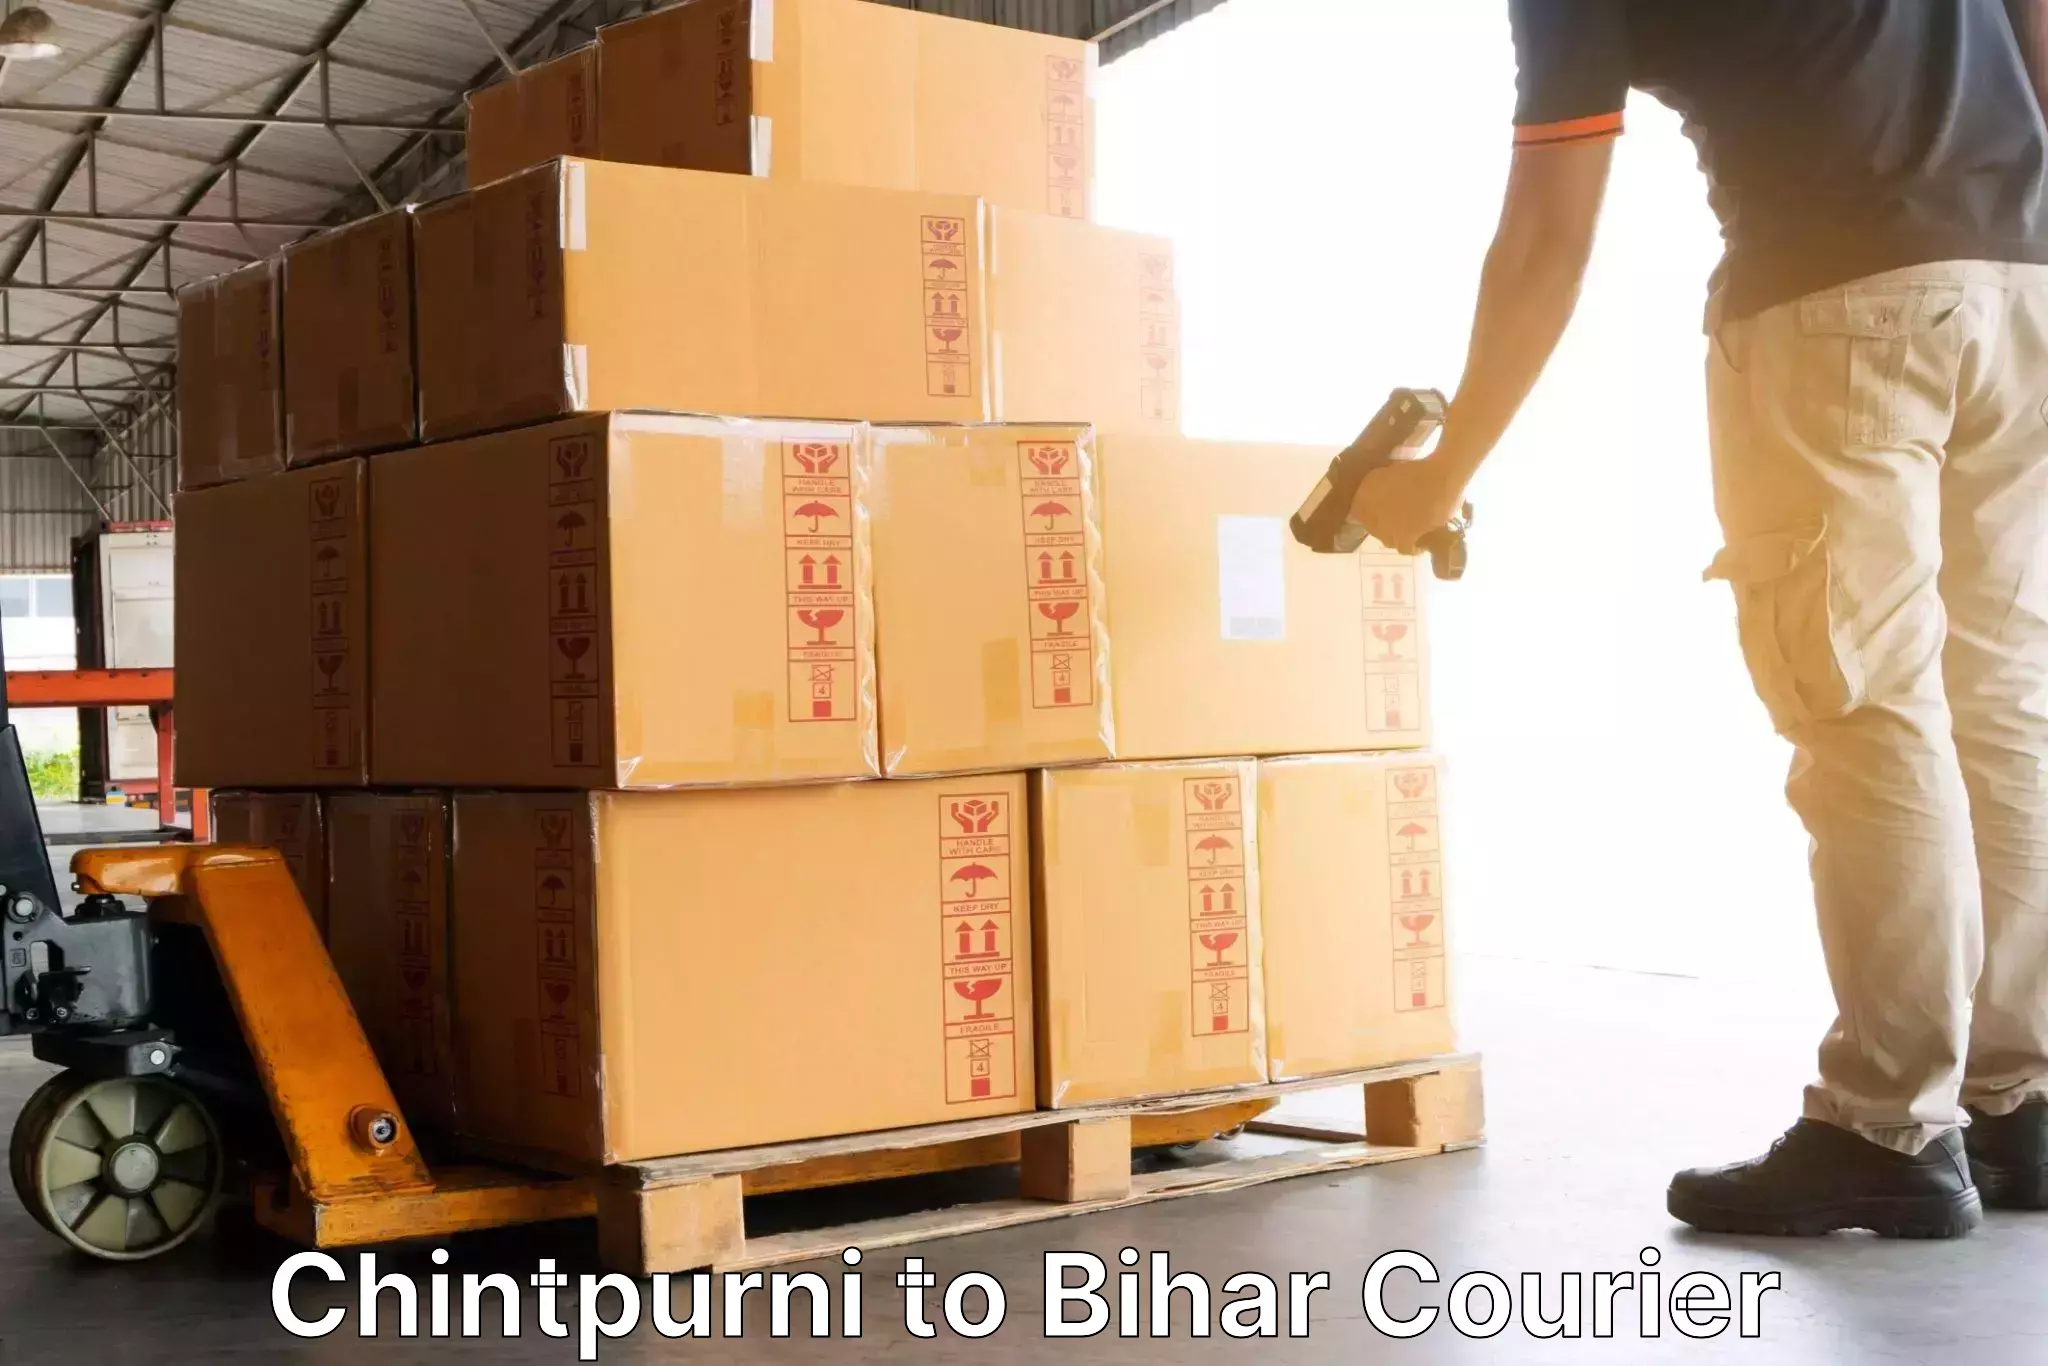 Residential courier service Chintpurni to Bihar